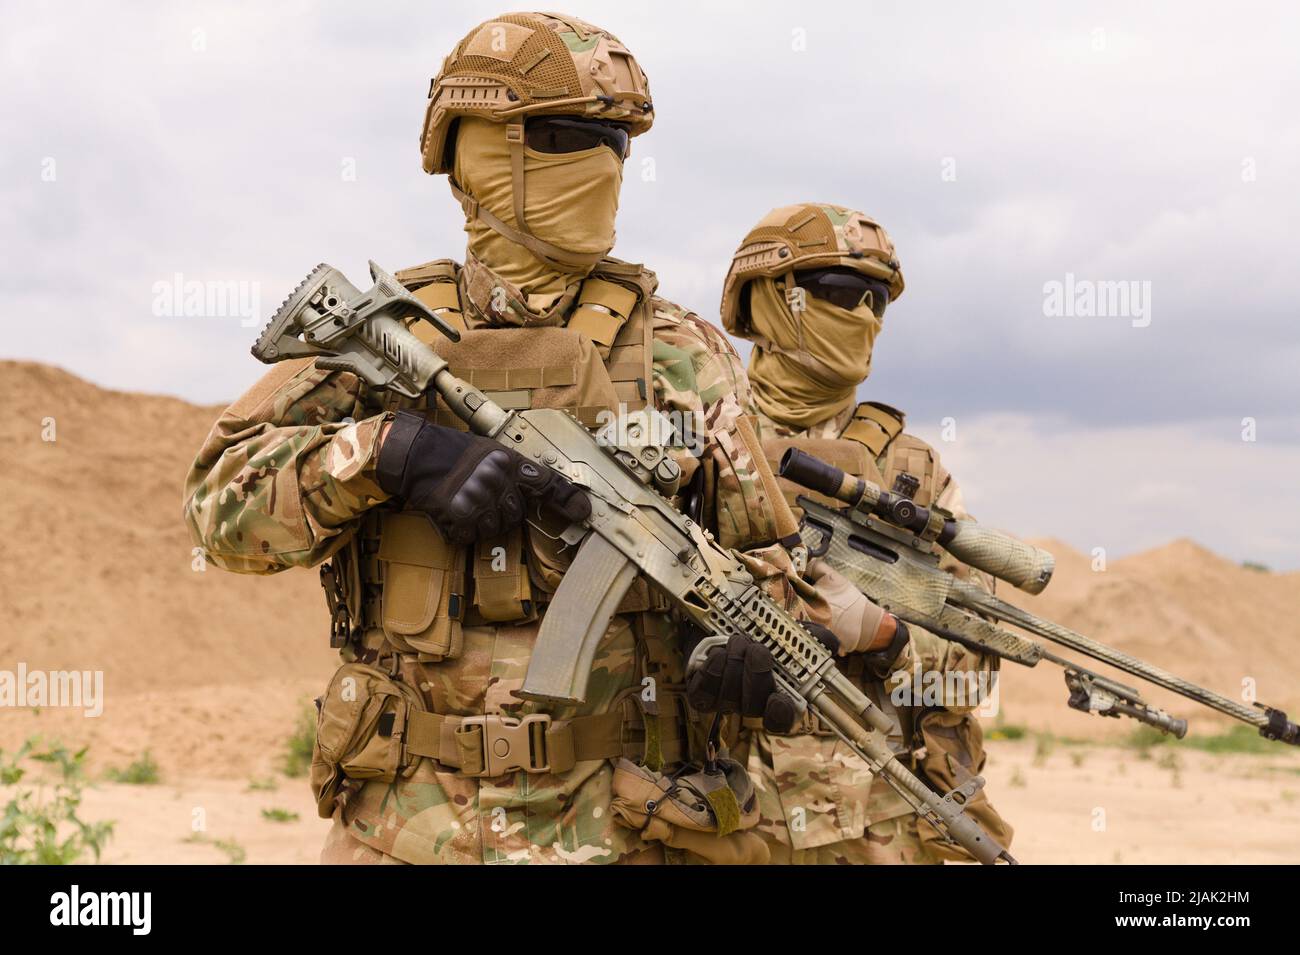 Two equipped and armed special forces soldiers with rifles in the desert. Stock Photo